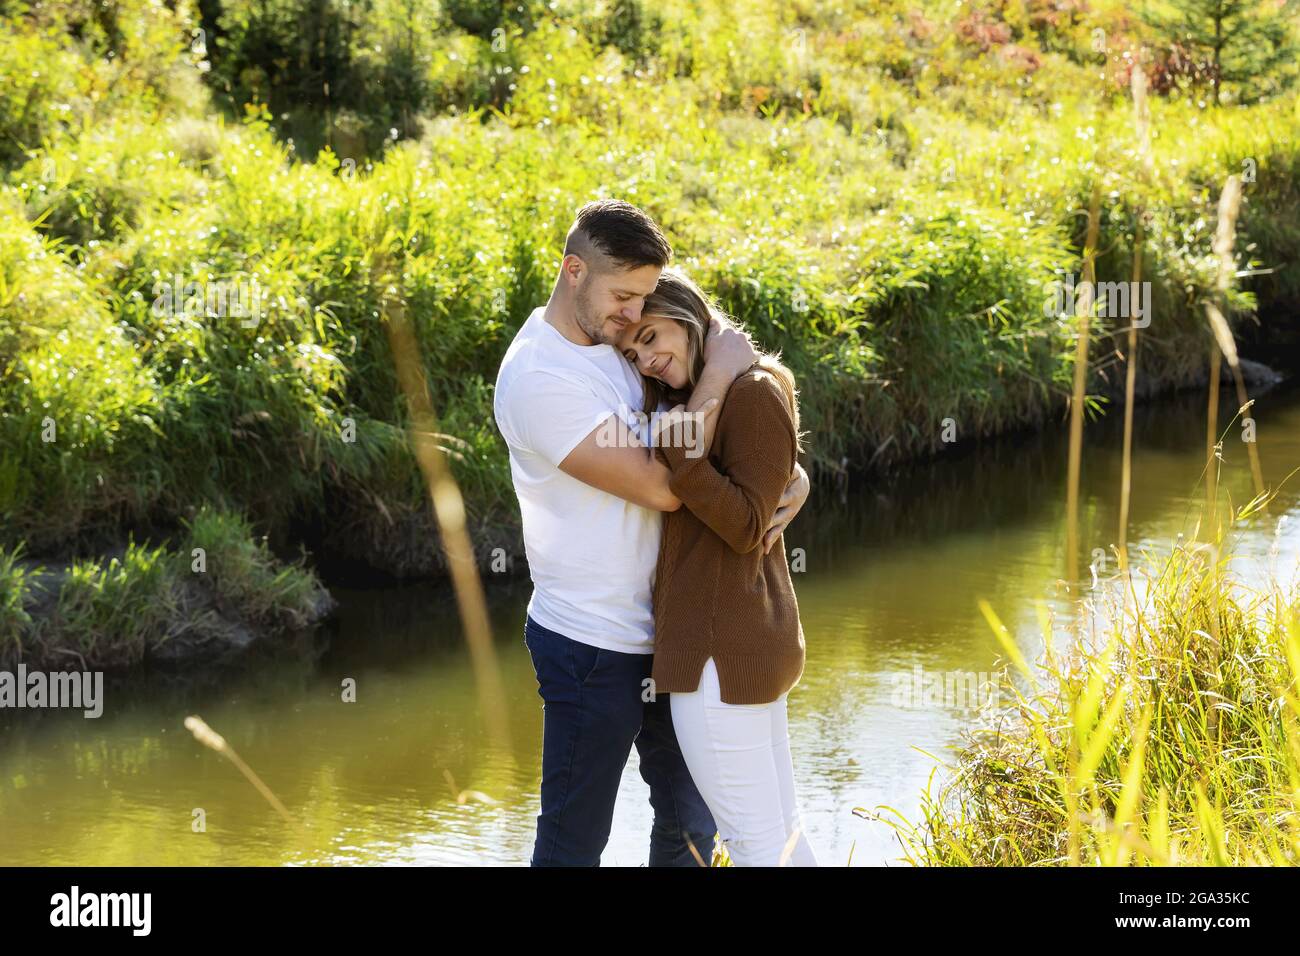 Husband and wife spending quality time together outdoors near a stream in a city park; Edmonton, Alberta, Canada Stock Photo